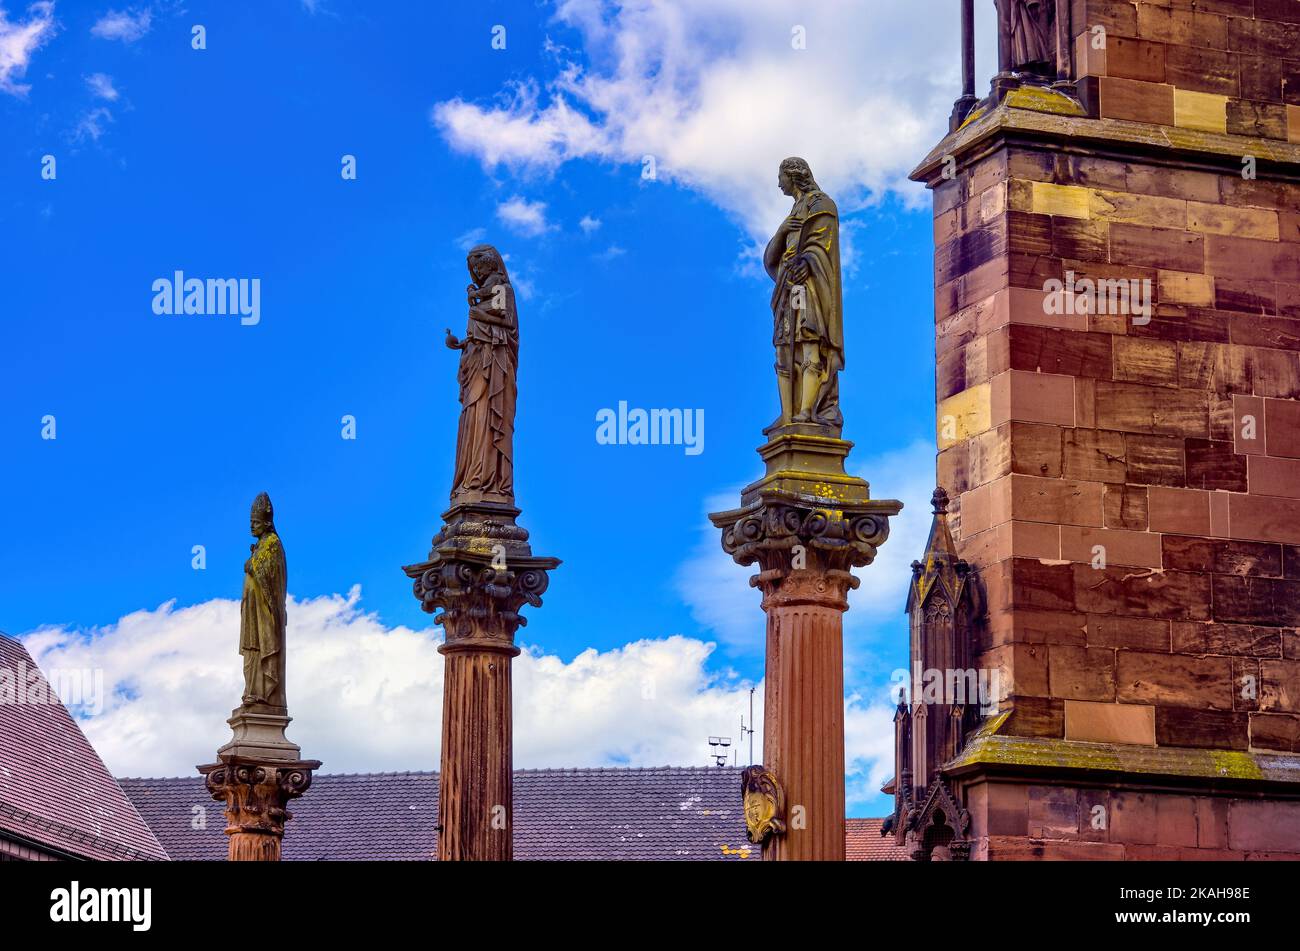 Plague pillars with patron saints in front of the main portal of the Freiburg Minster on Minster Square in the historic Old Town of Freiburg, Germany. Stock Photo